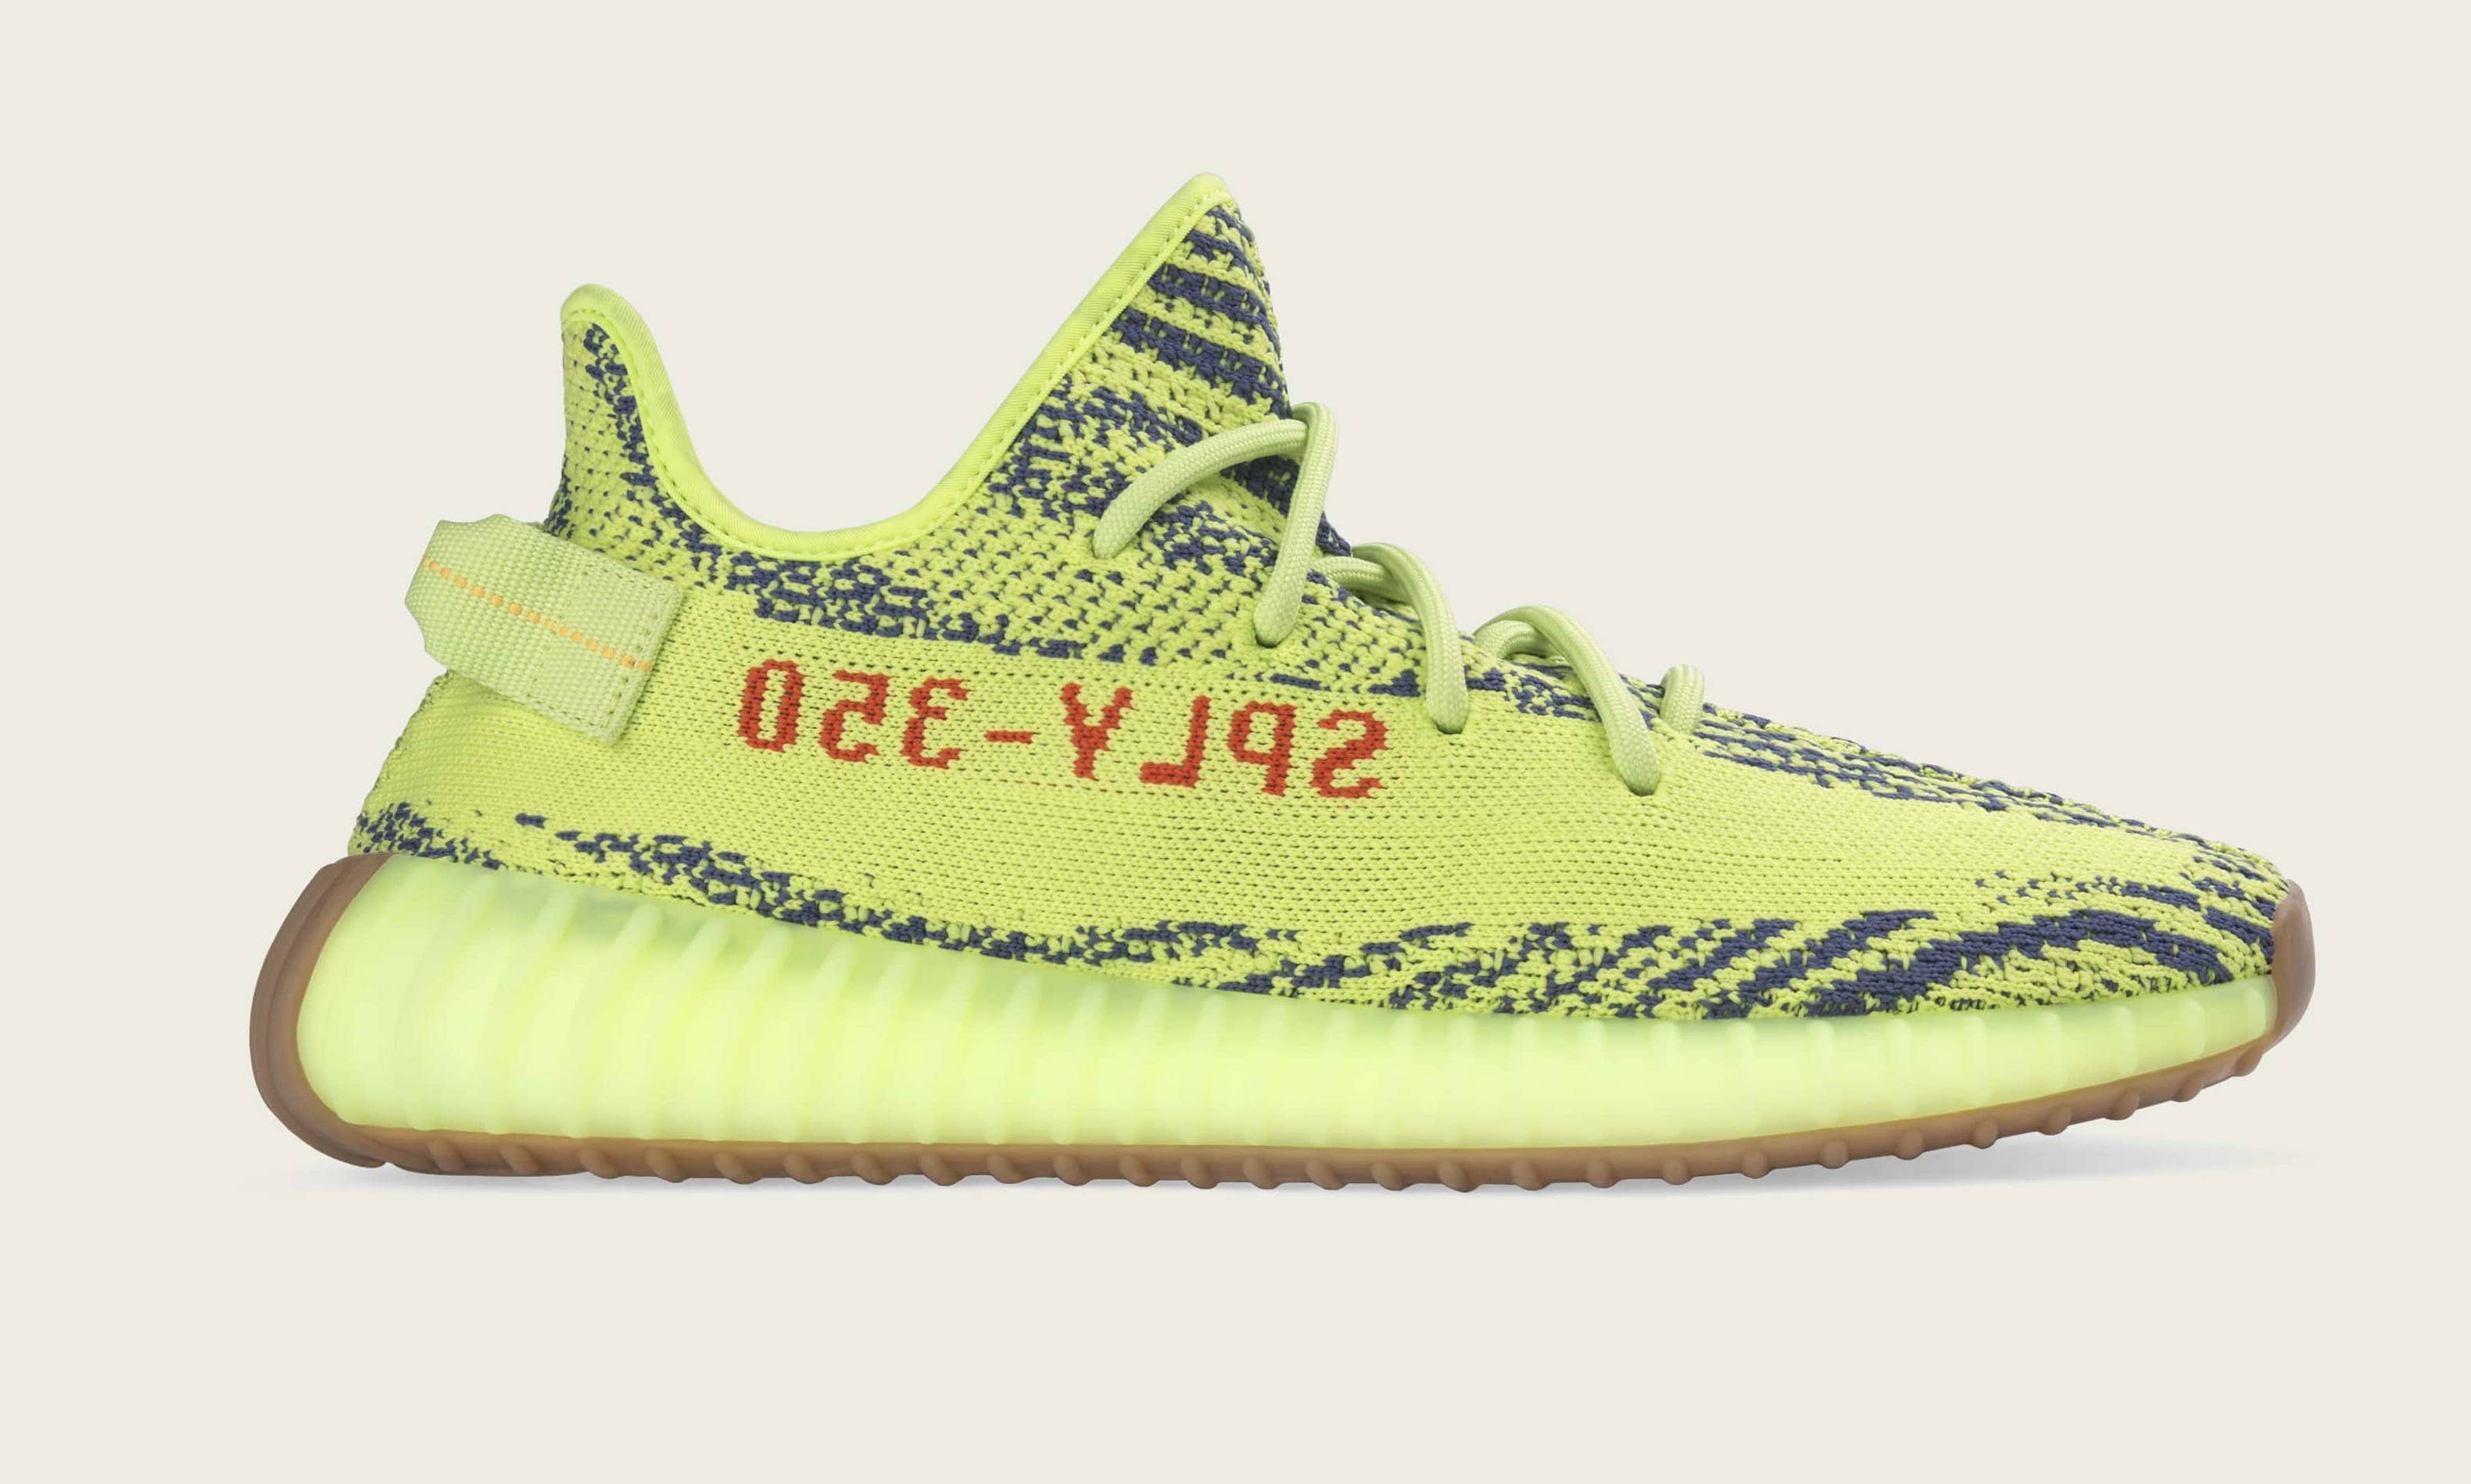 Adidas Yeezy Boost 350 V2 'Semi Frozen Yellow' B37572 (Lateral)